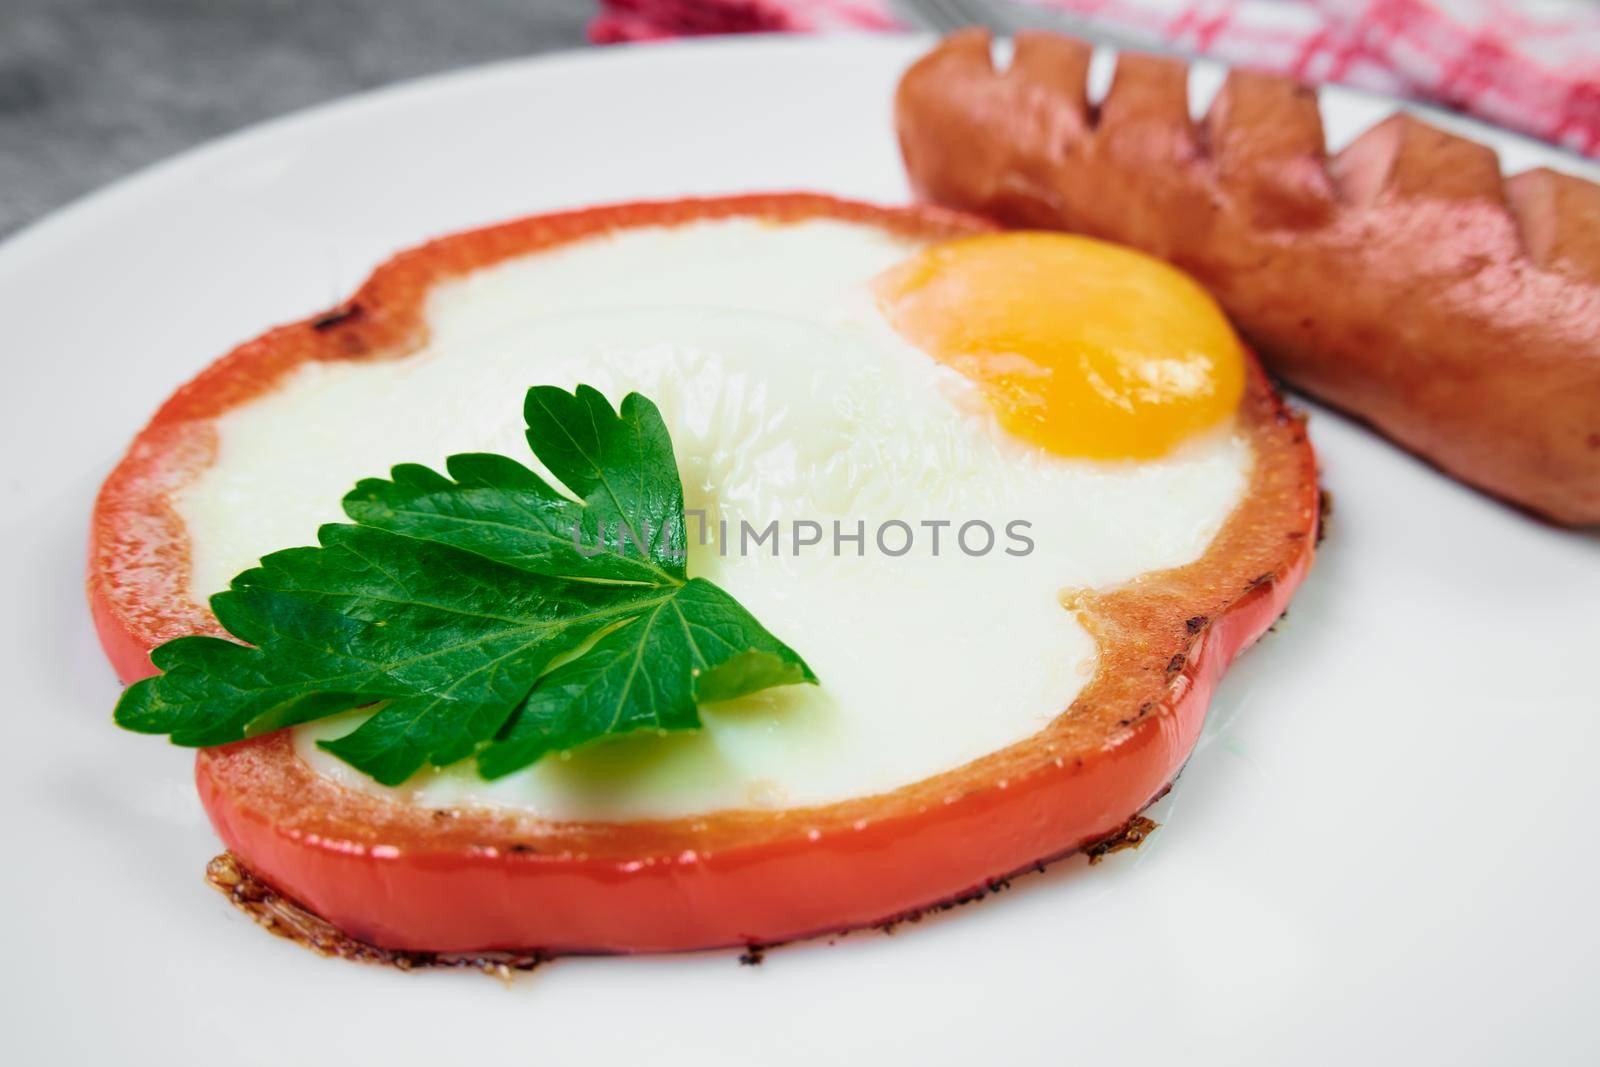 fried egg with red bell pepper on the plate.